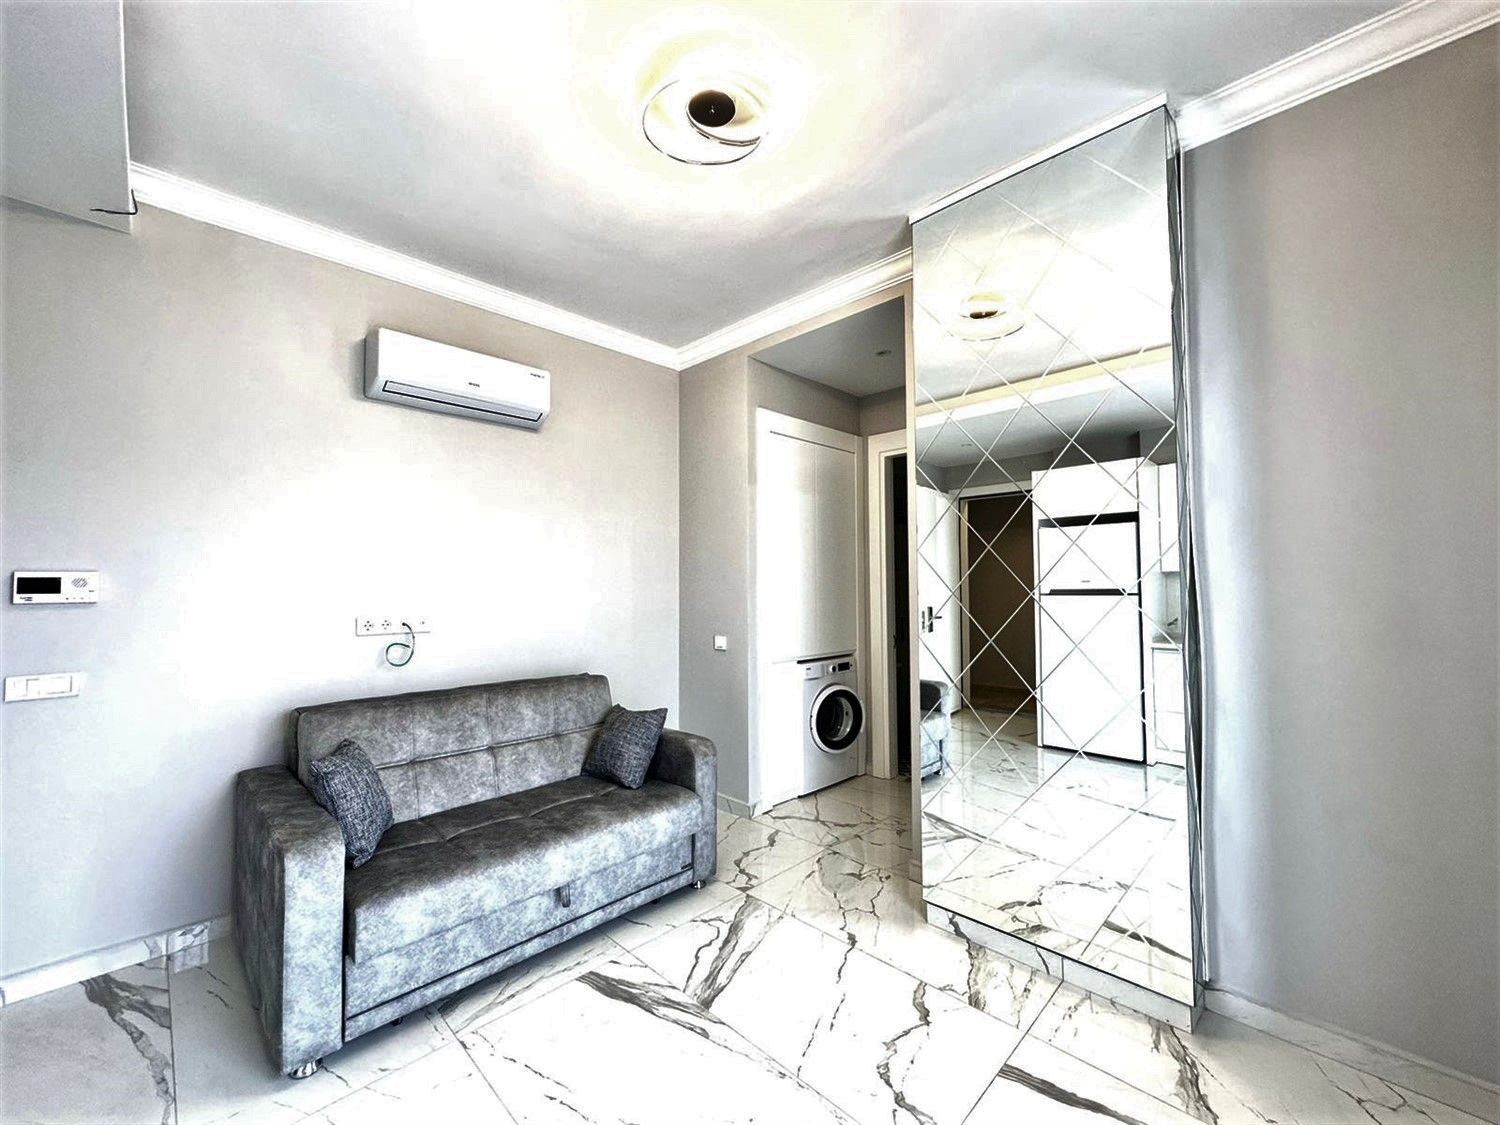 1 bedroom apartment in new building - Alanya center, 150 m from the sea